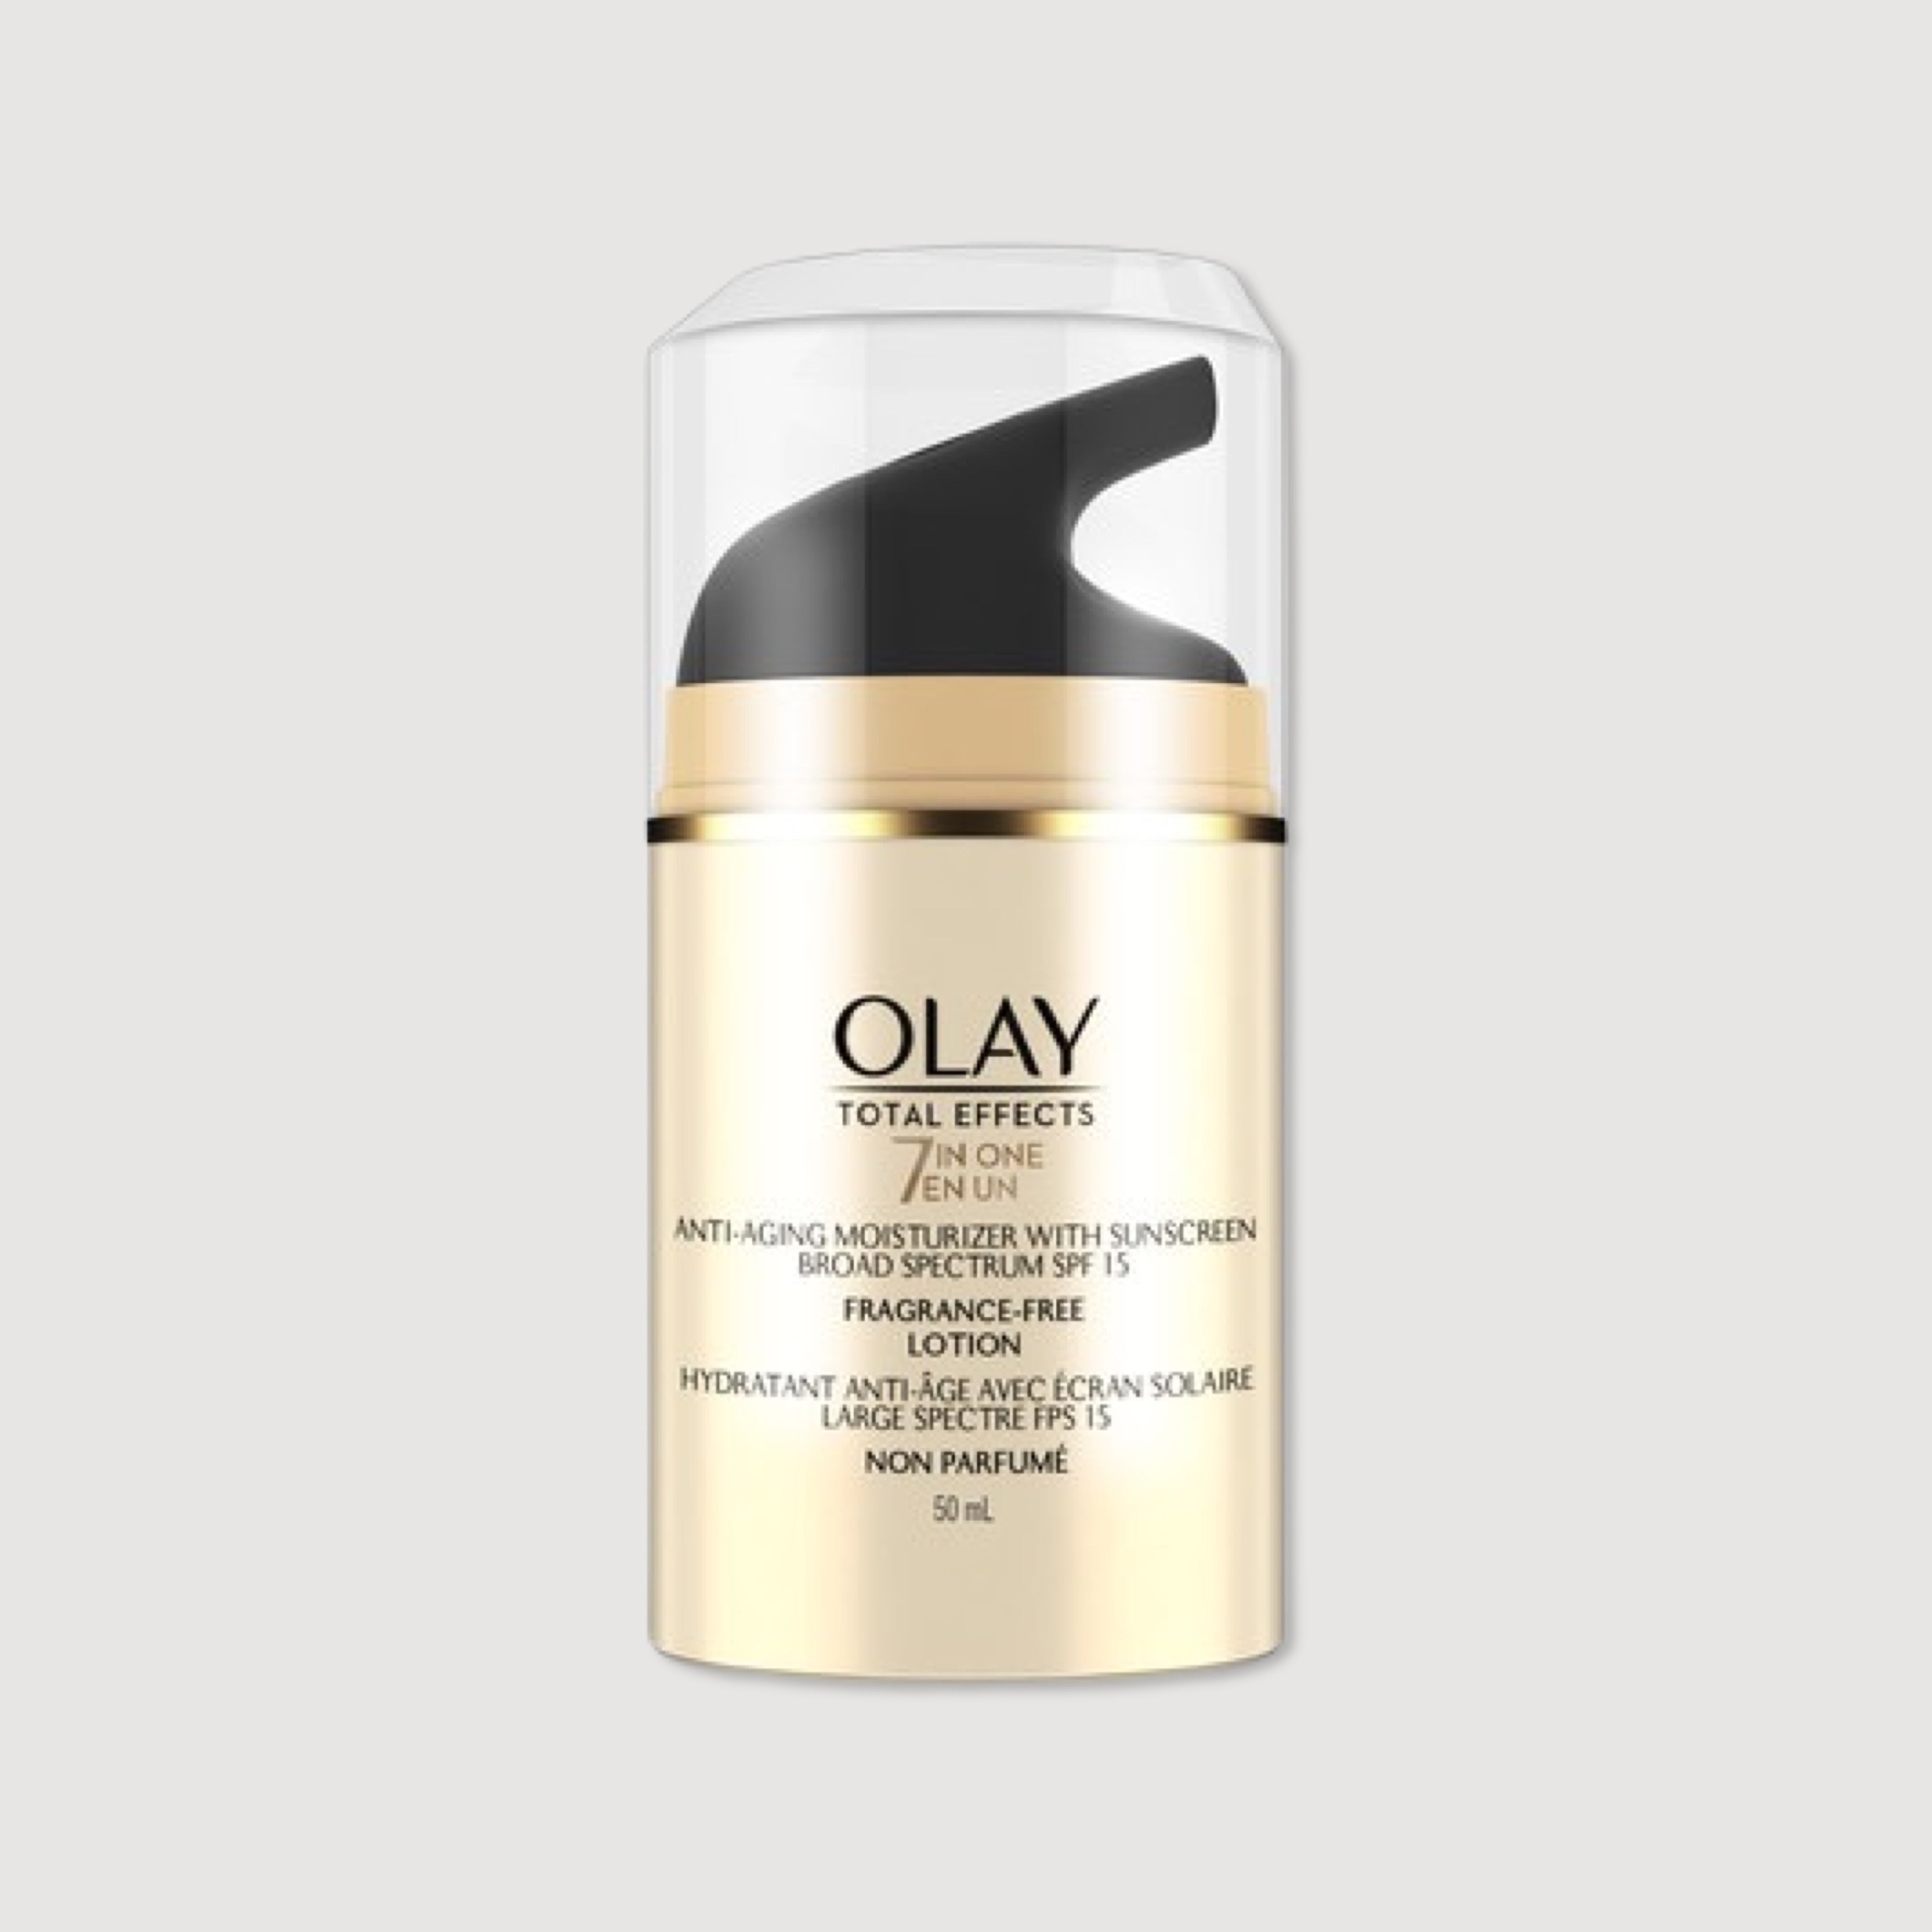 Olay Total Effects Anti-Aging Moisturizer with SPF 15